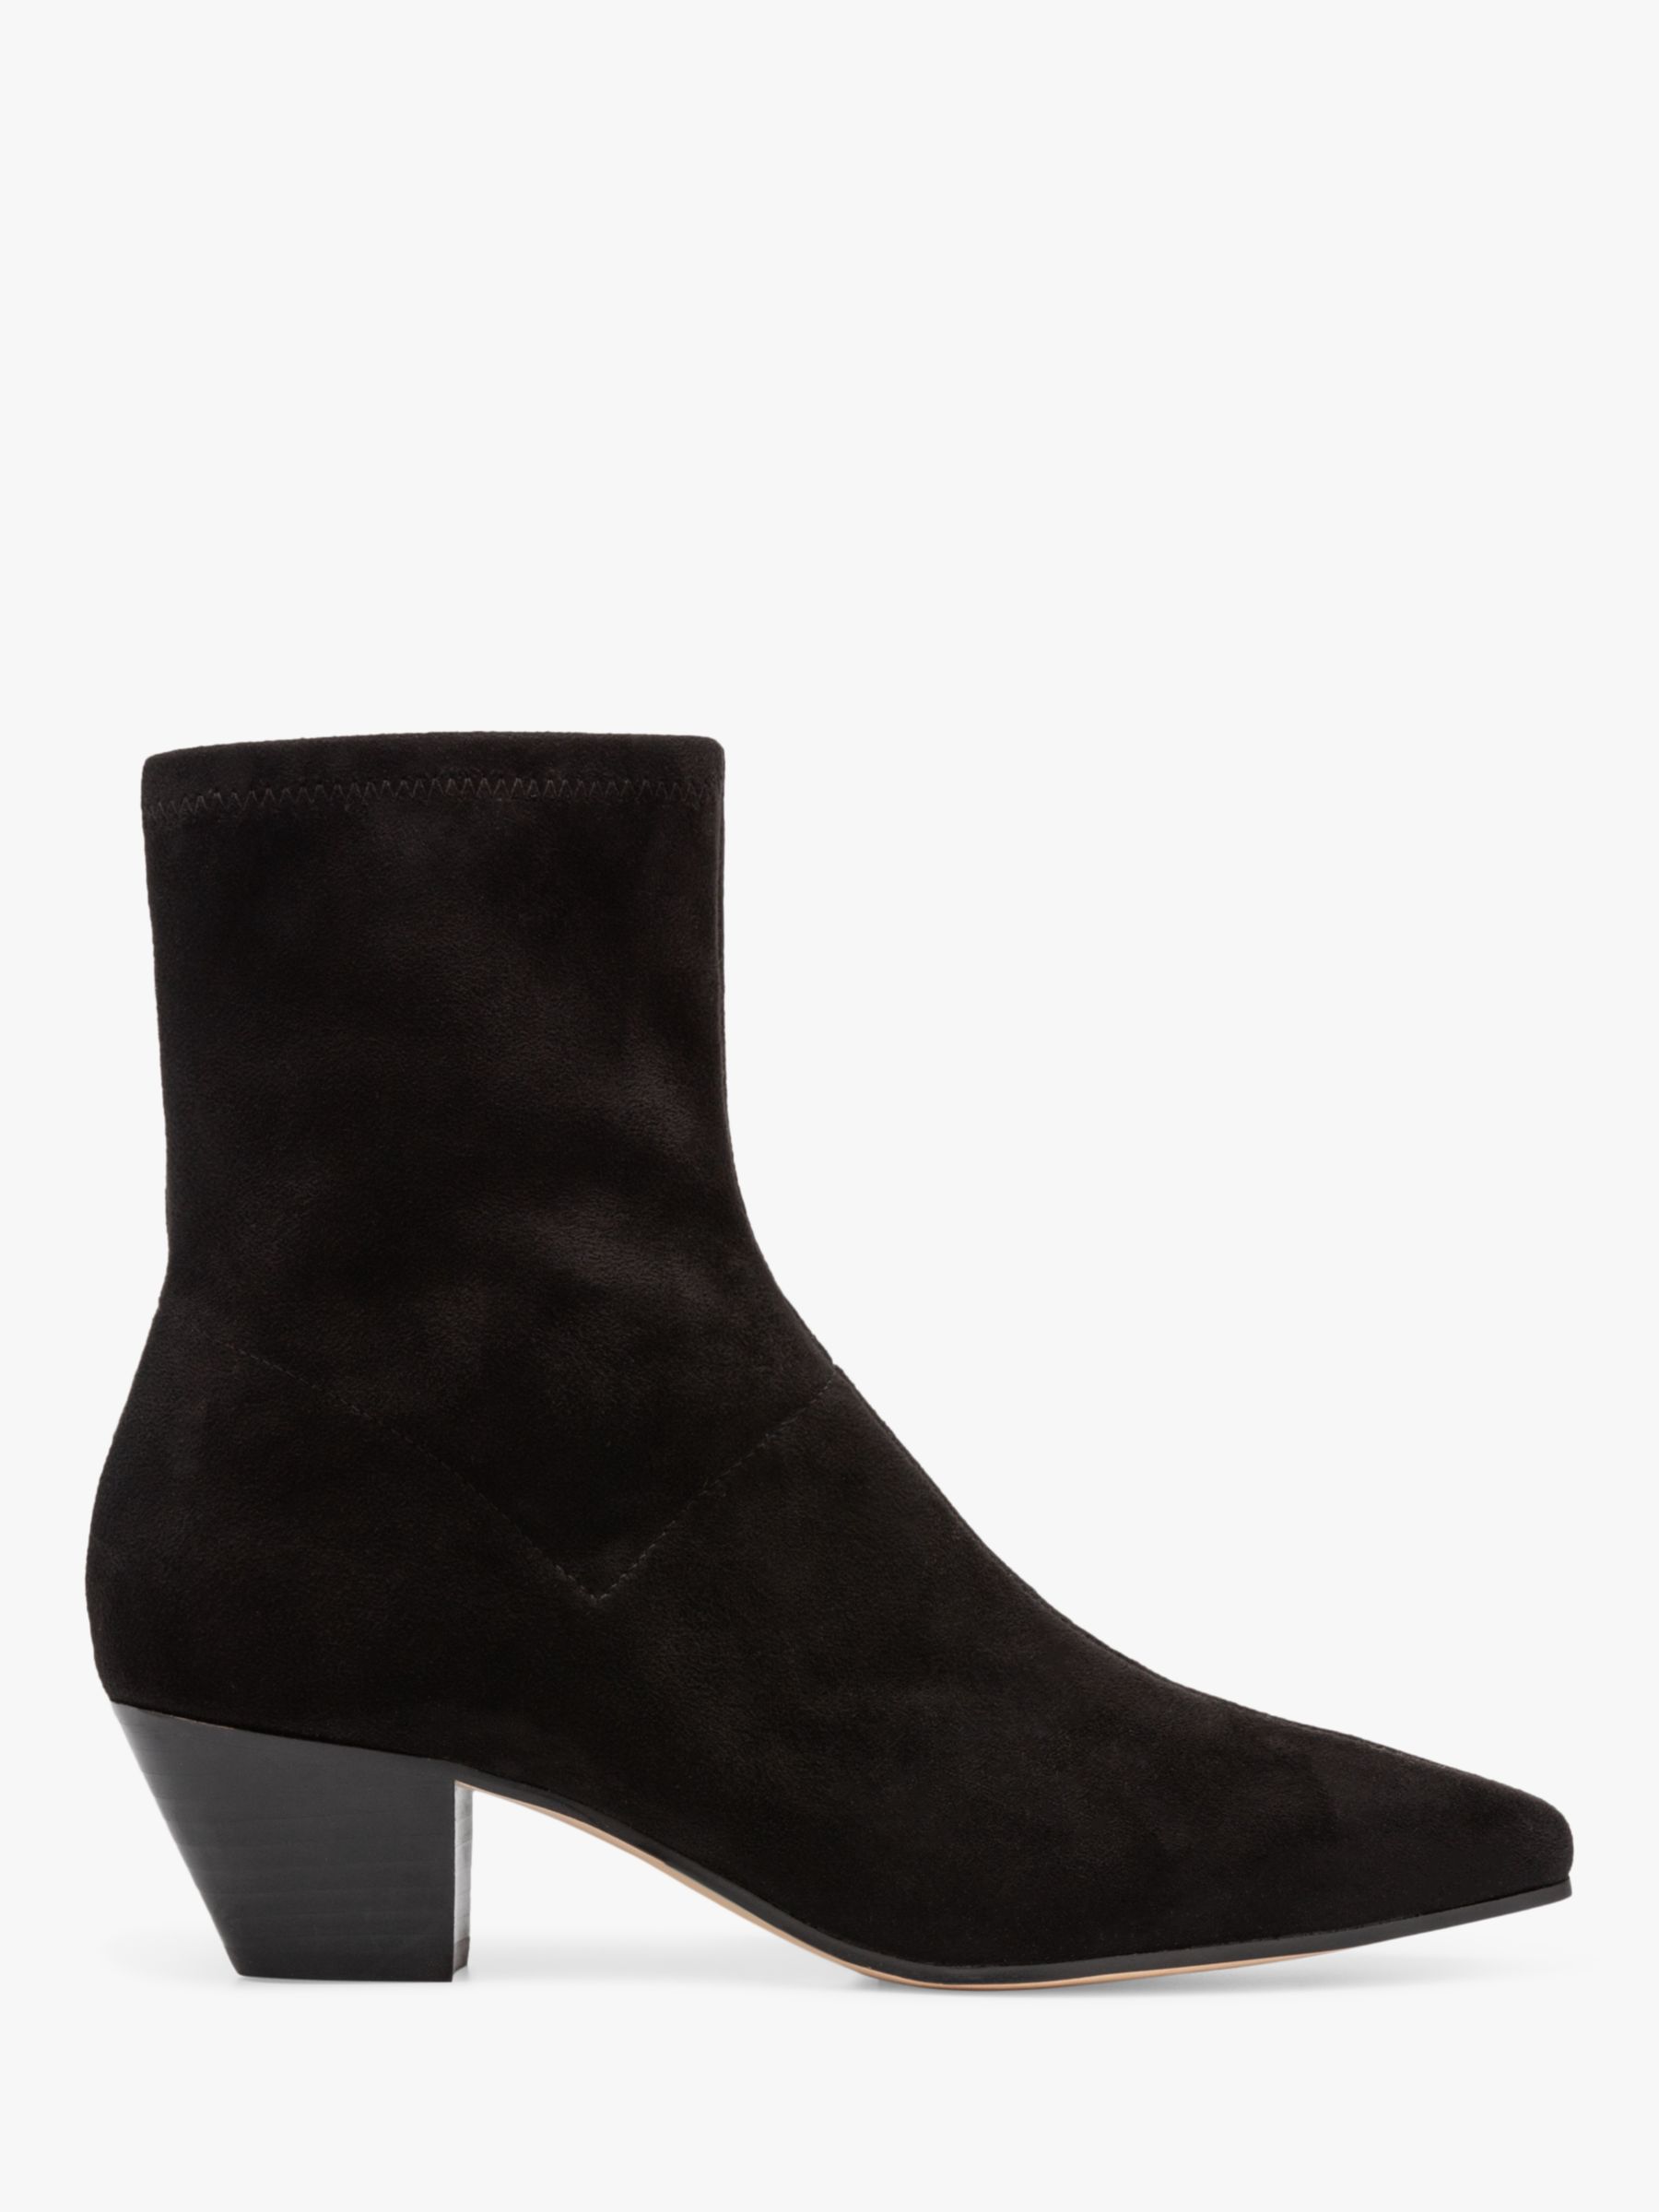 Boden Western Stretch Ankle Boots, Black at John Lewis & Partners